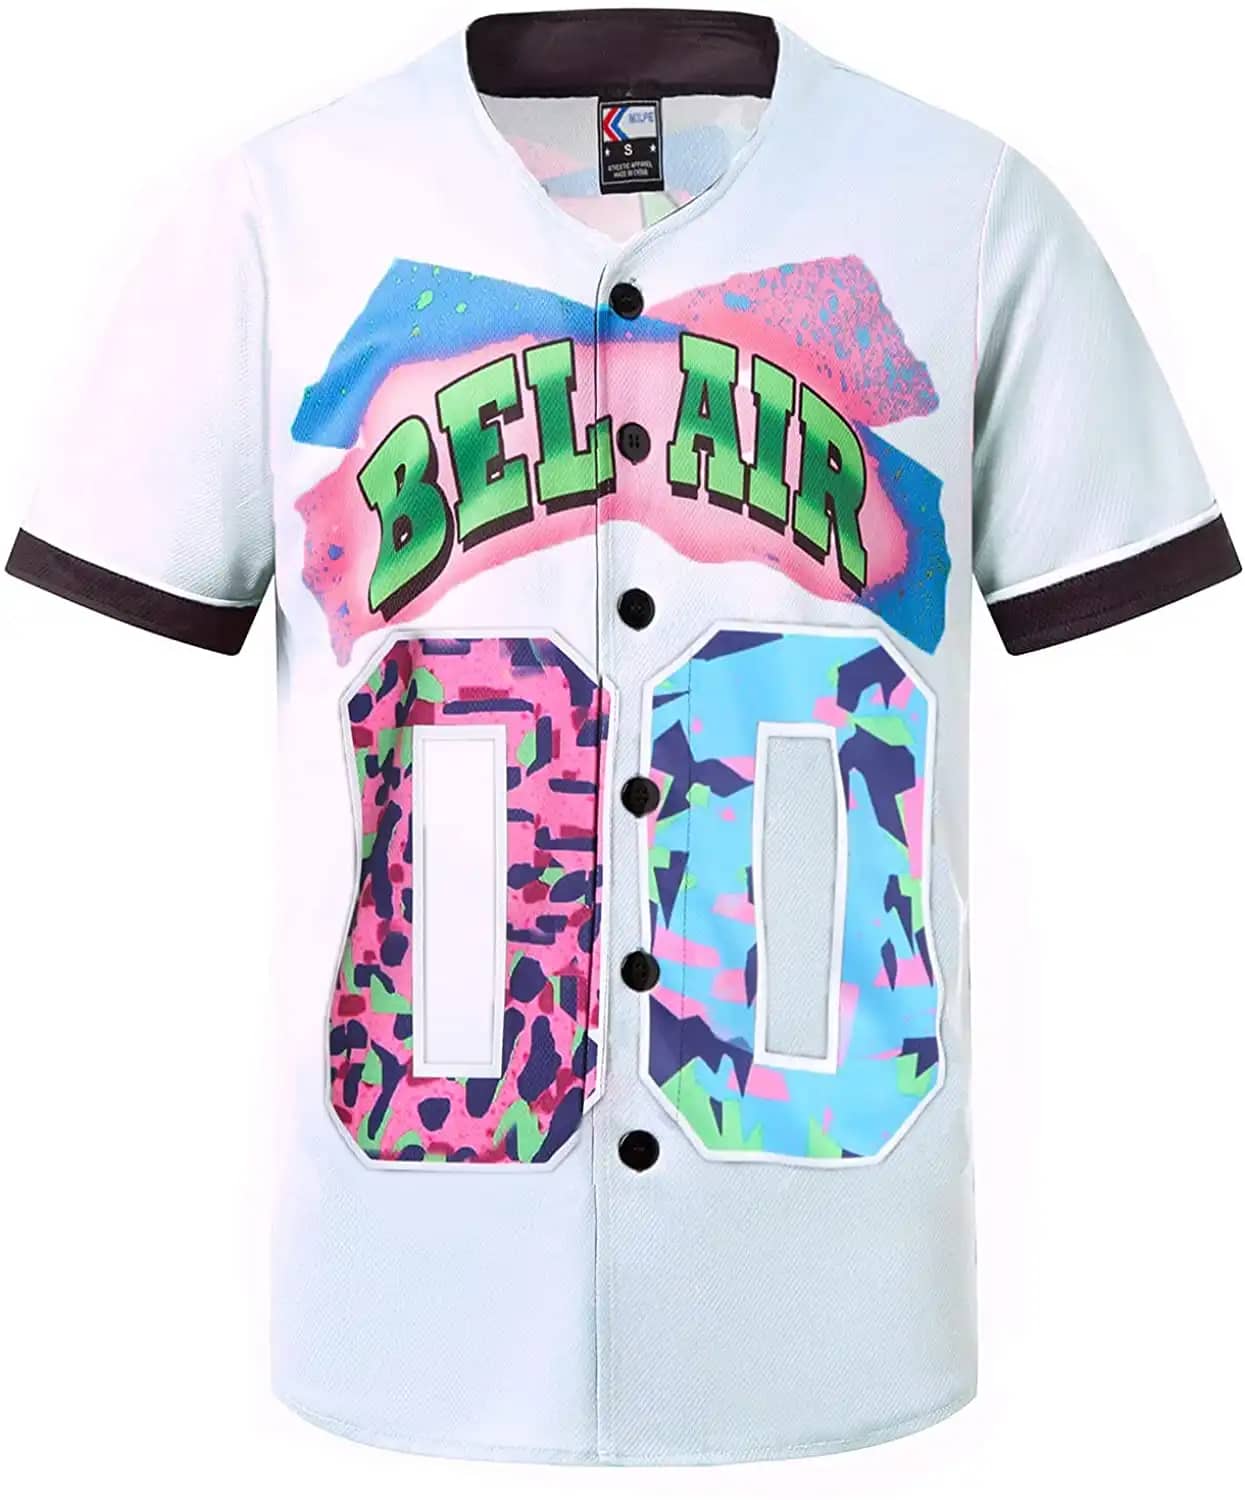 Personalized White Shirts Hip Hop 90S Fashion Custom Number Idea Gift For Fans Baseball Jersey